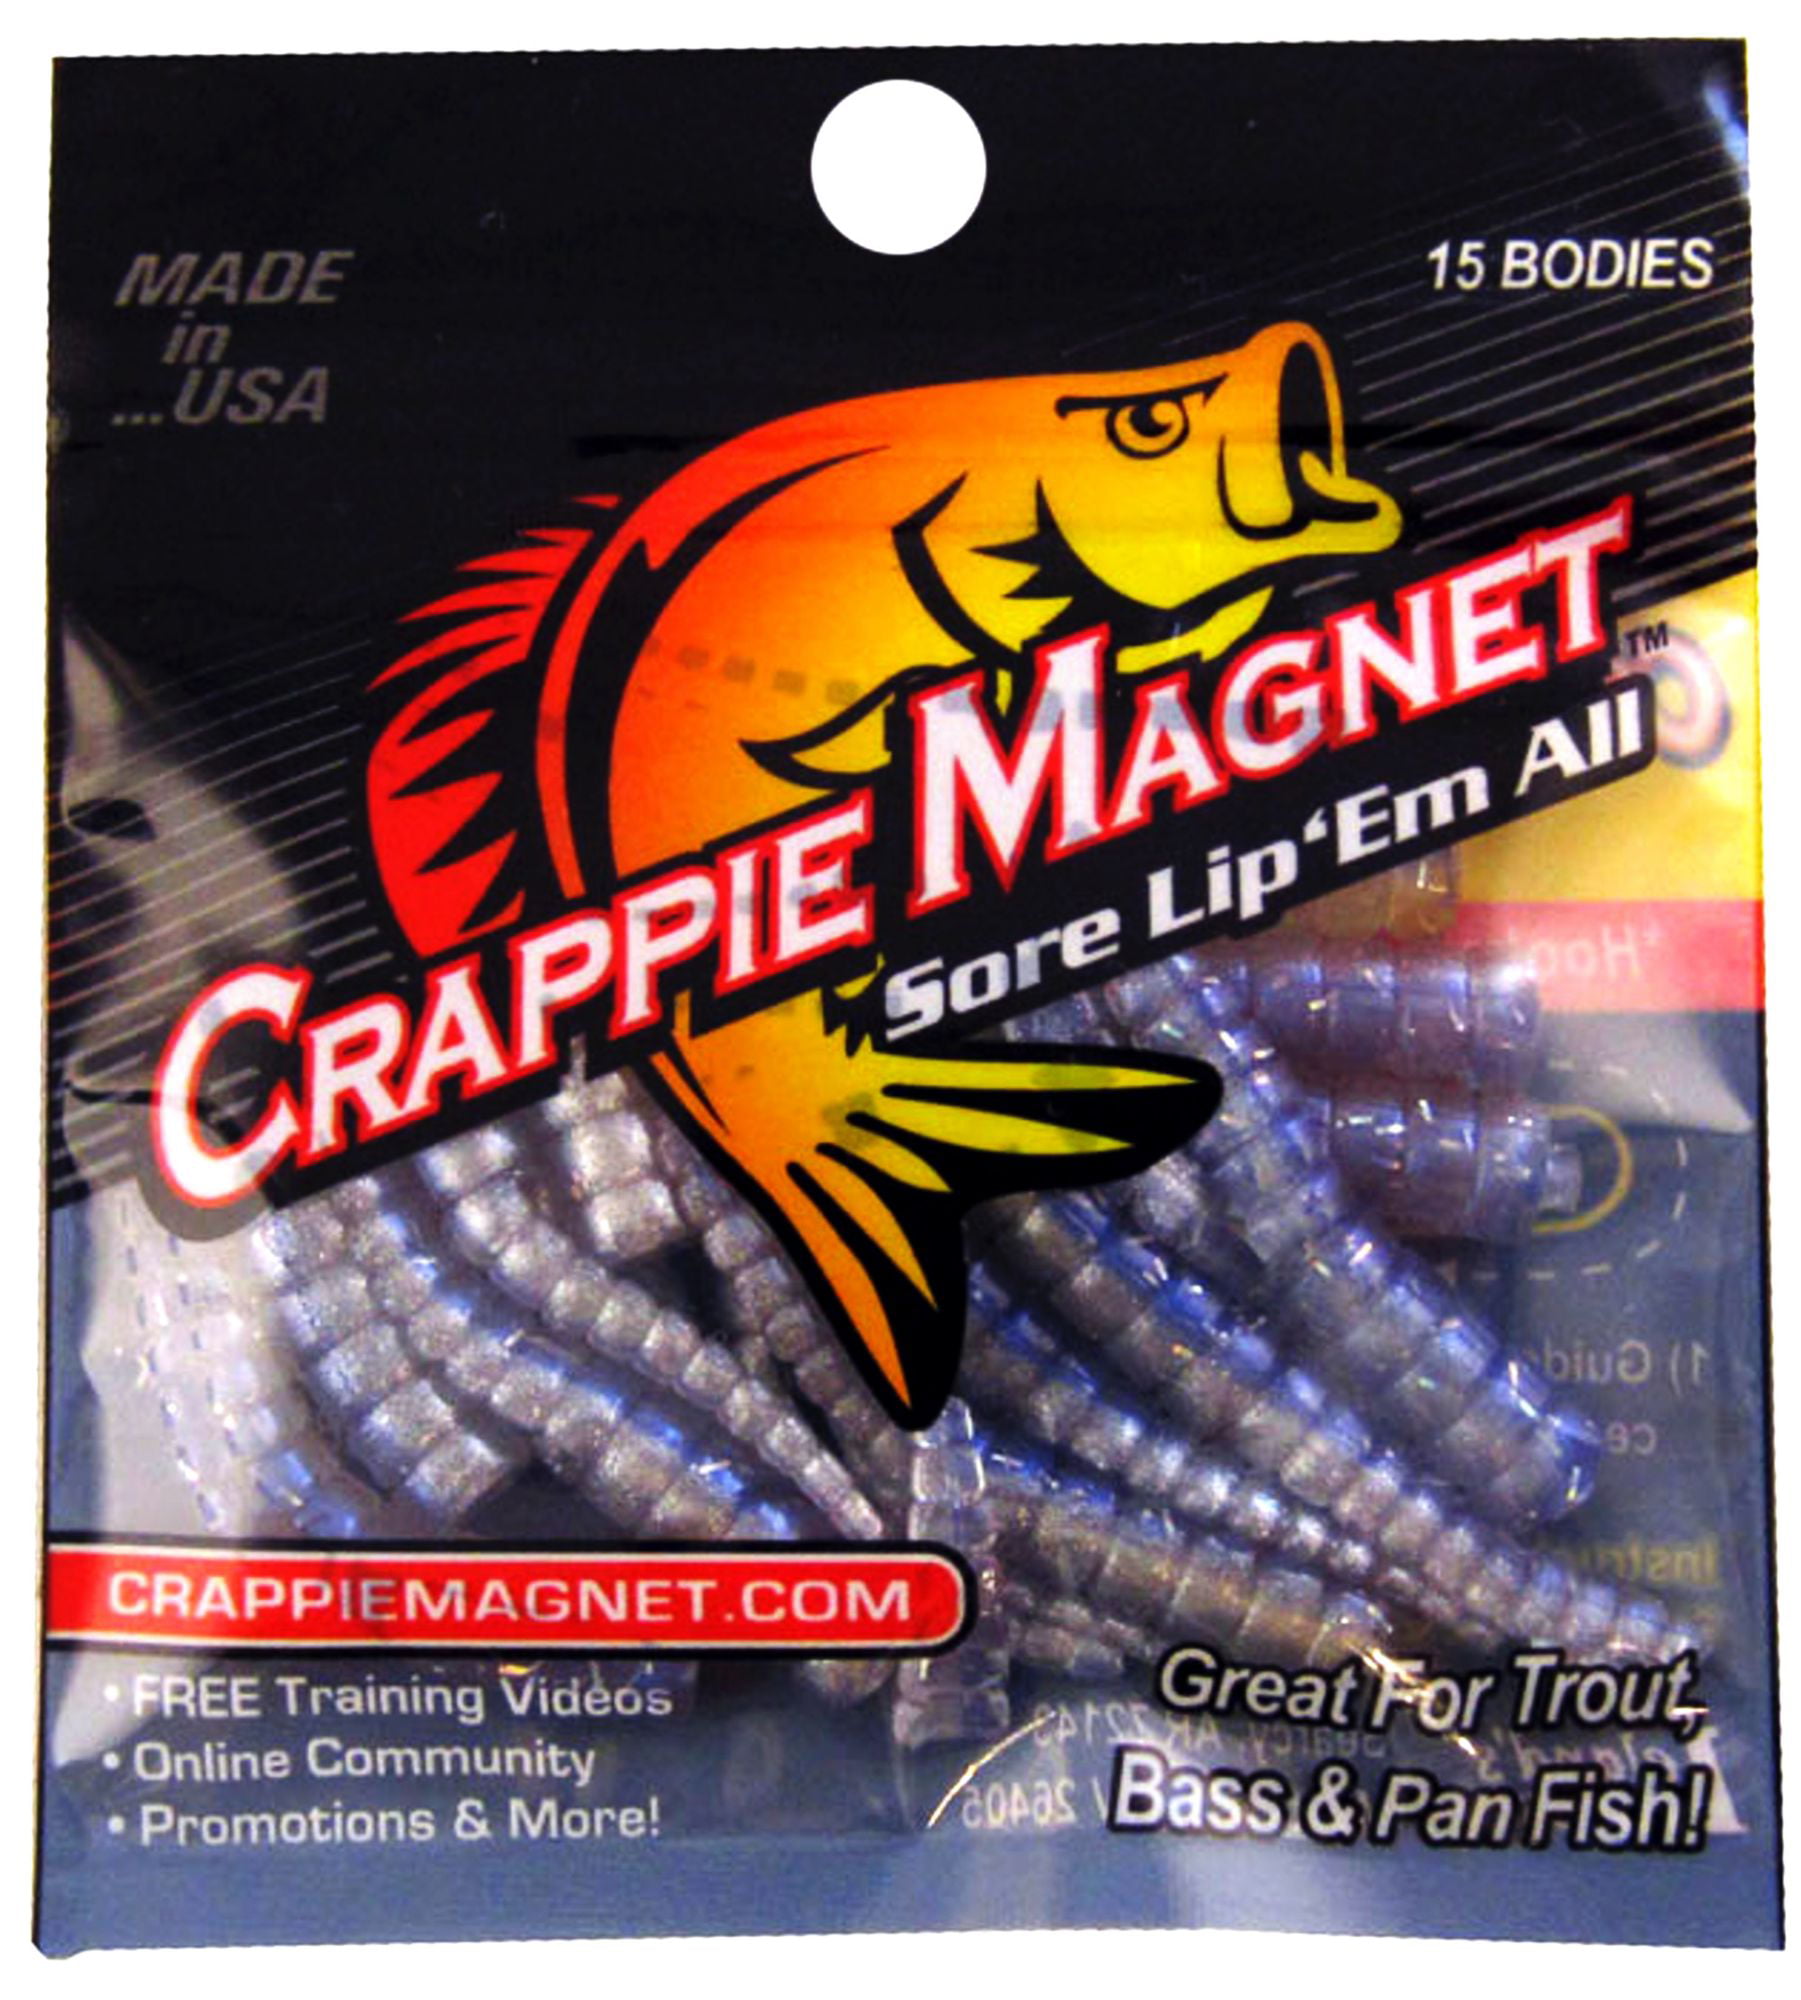 Leland's Crappie Slab Magnet 2.5" Soft Bait Fishing Lures DOUBLE UGLY